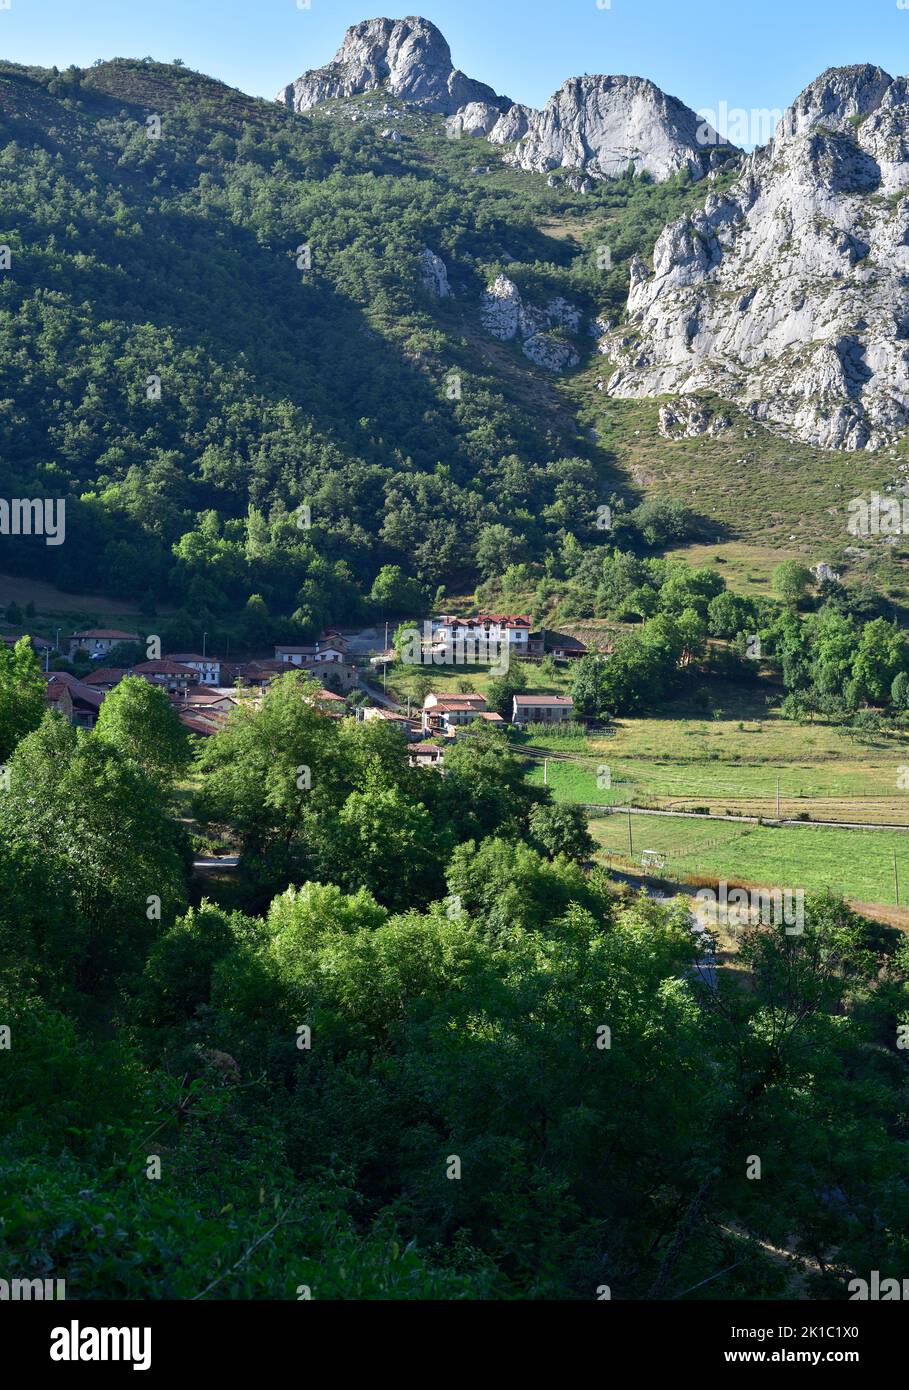 The village of Dobres, near Cucayo, showing its mountain setting in Parque Natural de Fuentes Carrionas. Stock Photo